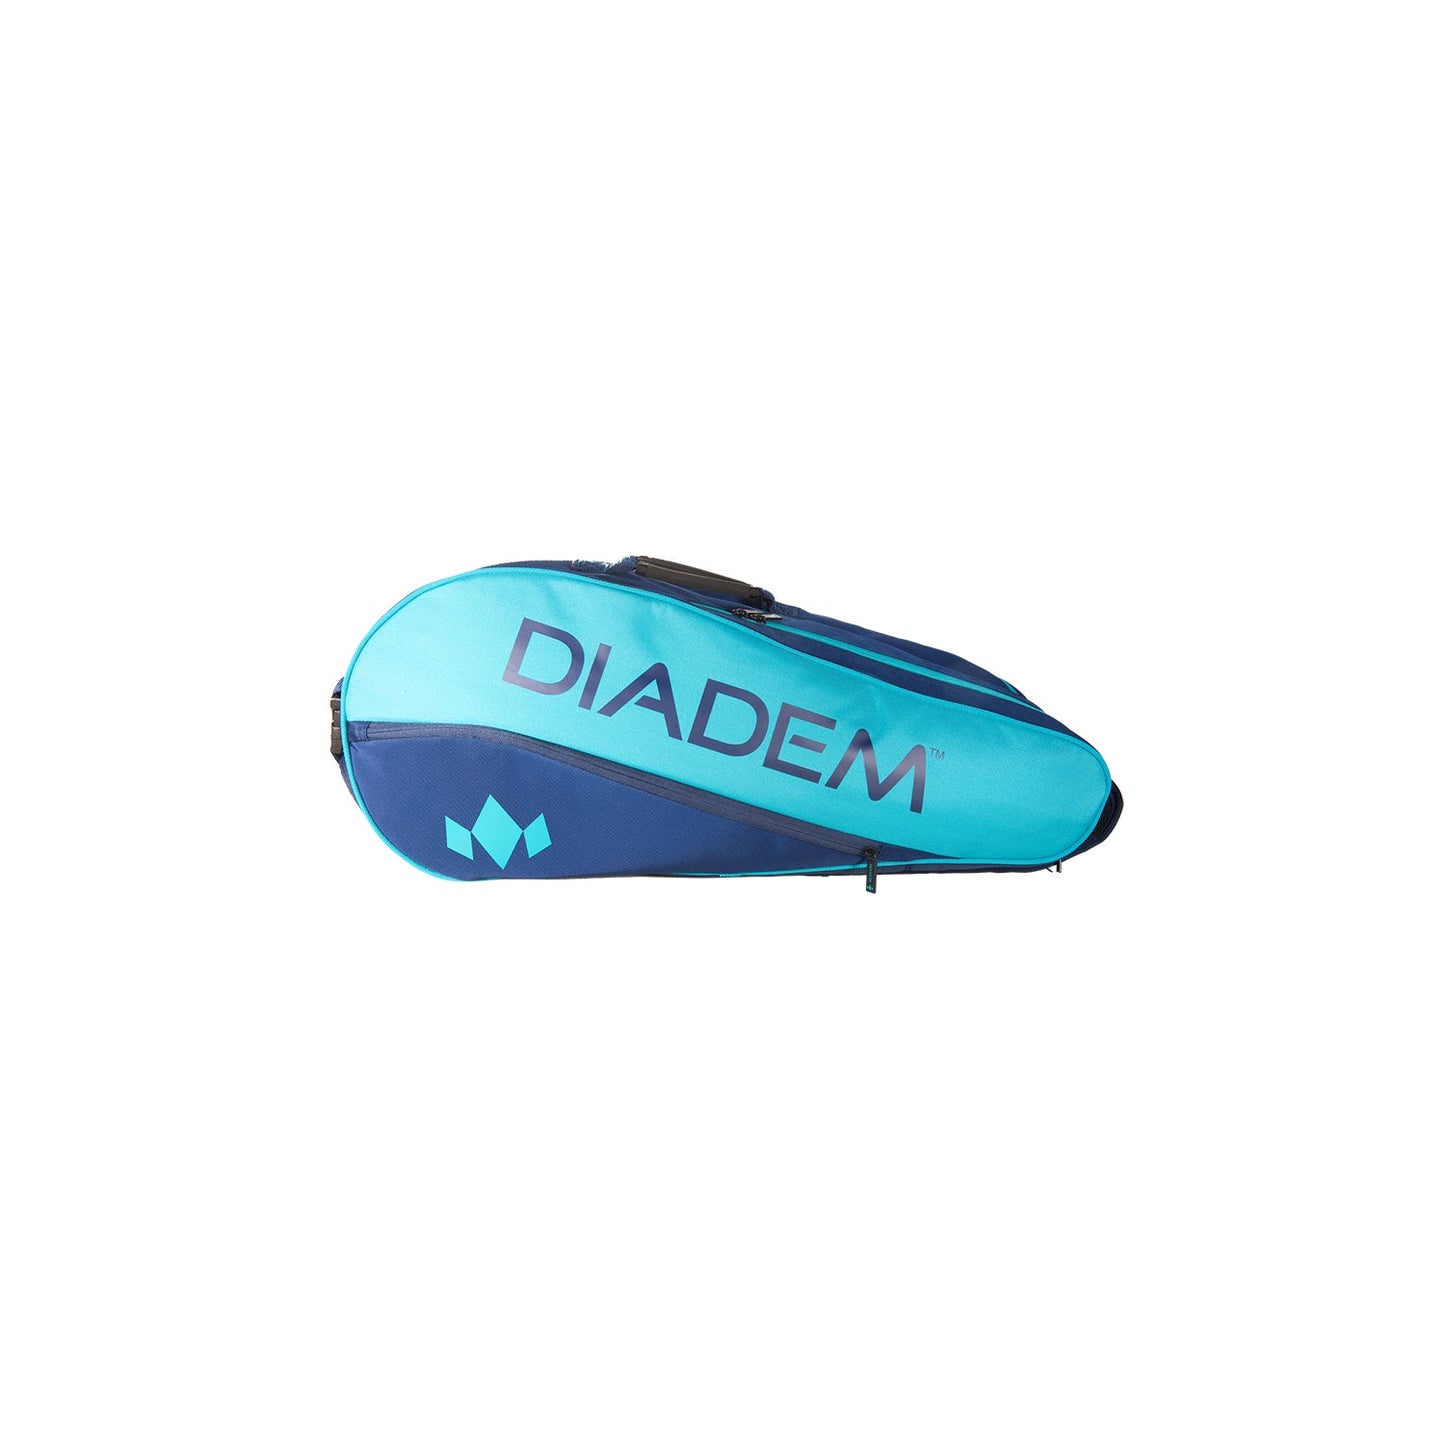 Diadem Tour 9 Pack Elevate Racket Bag (Teal/Navy) by Diadem Sports